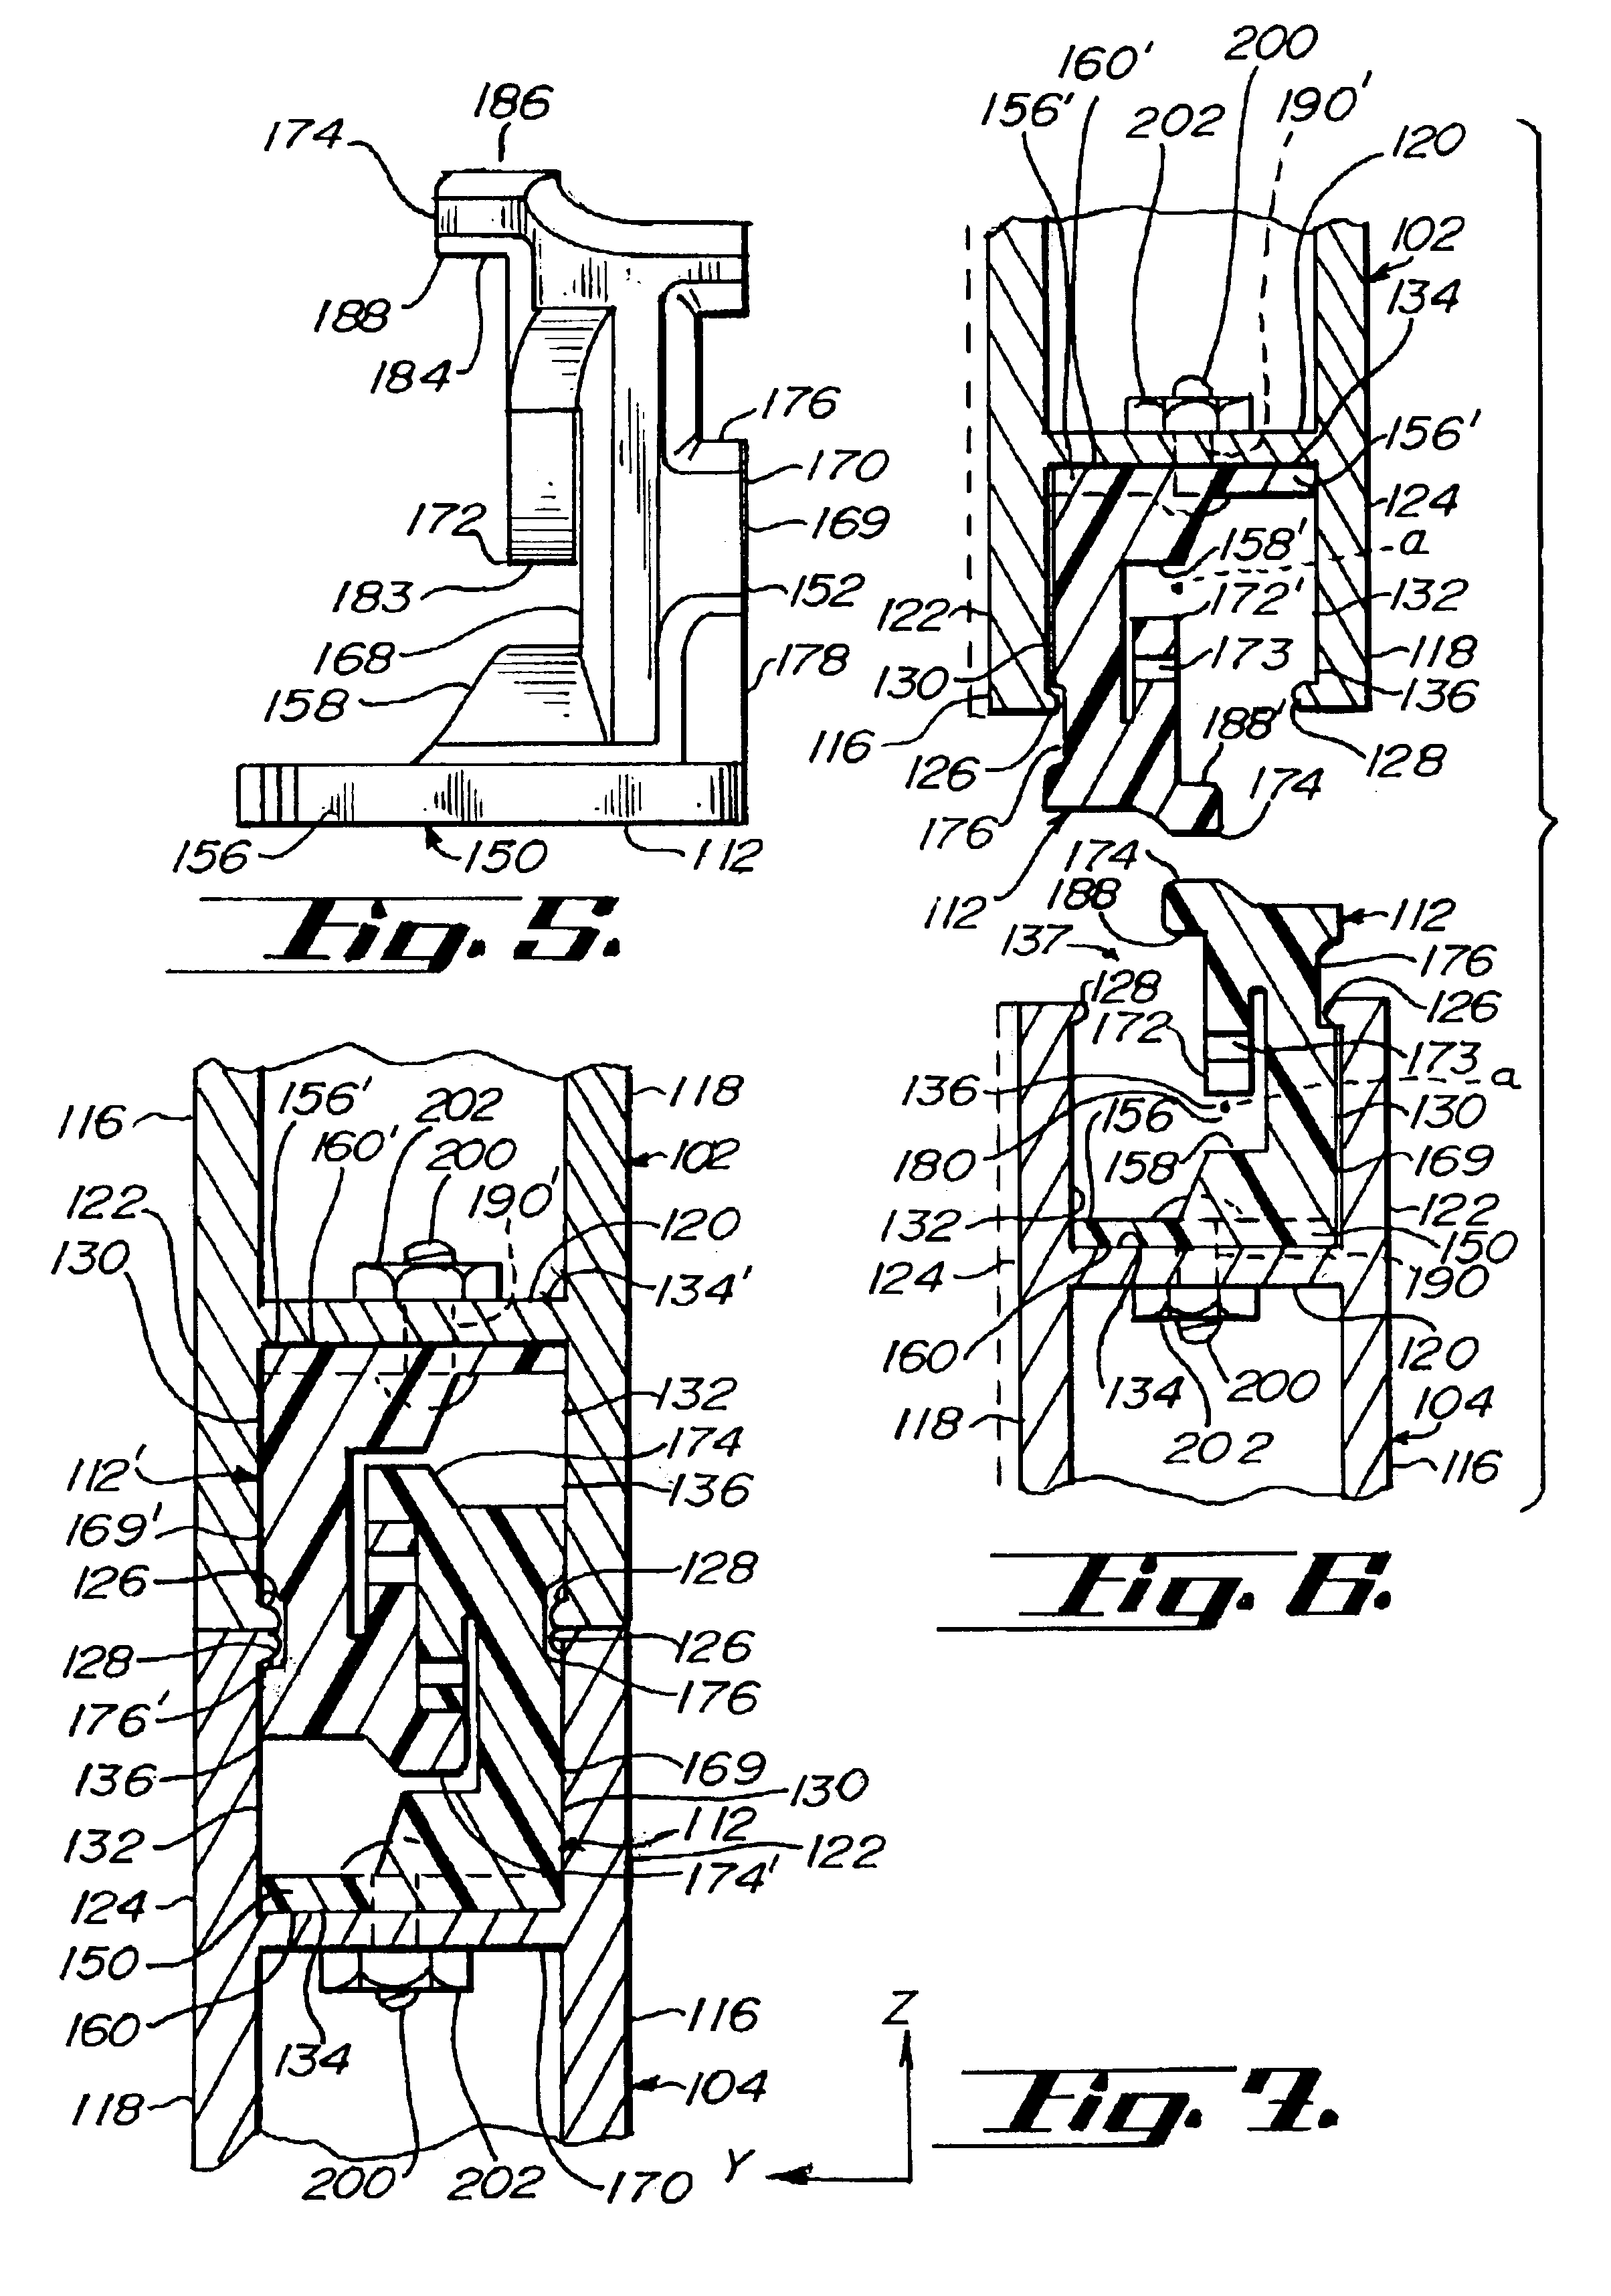 Panel connector system